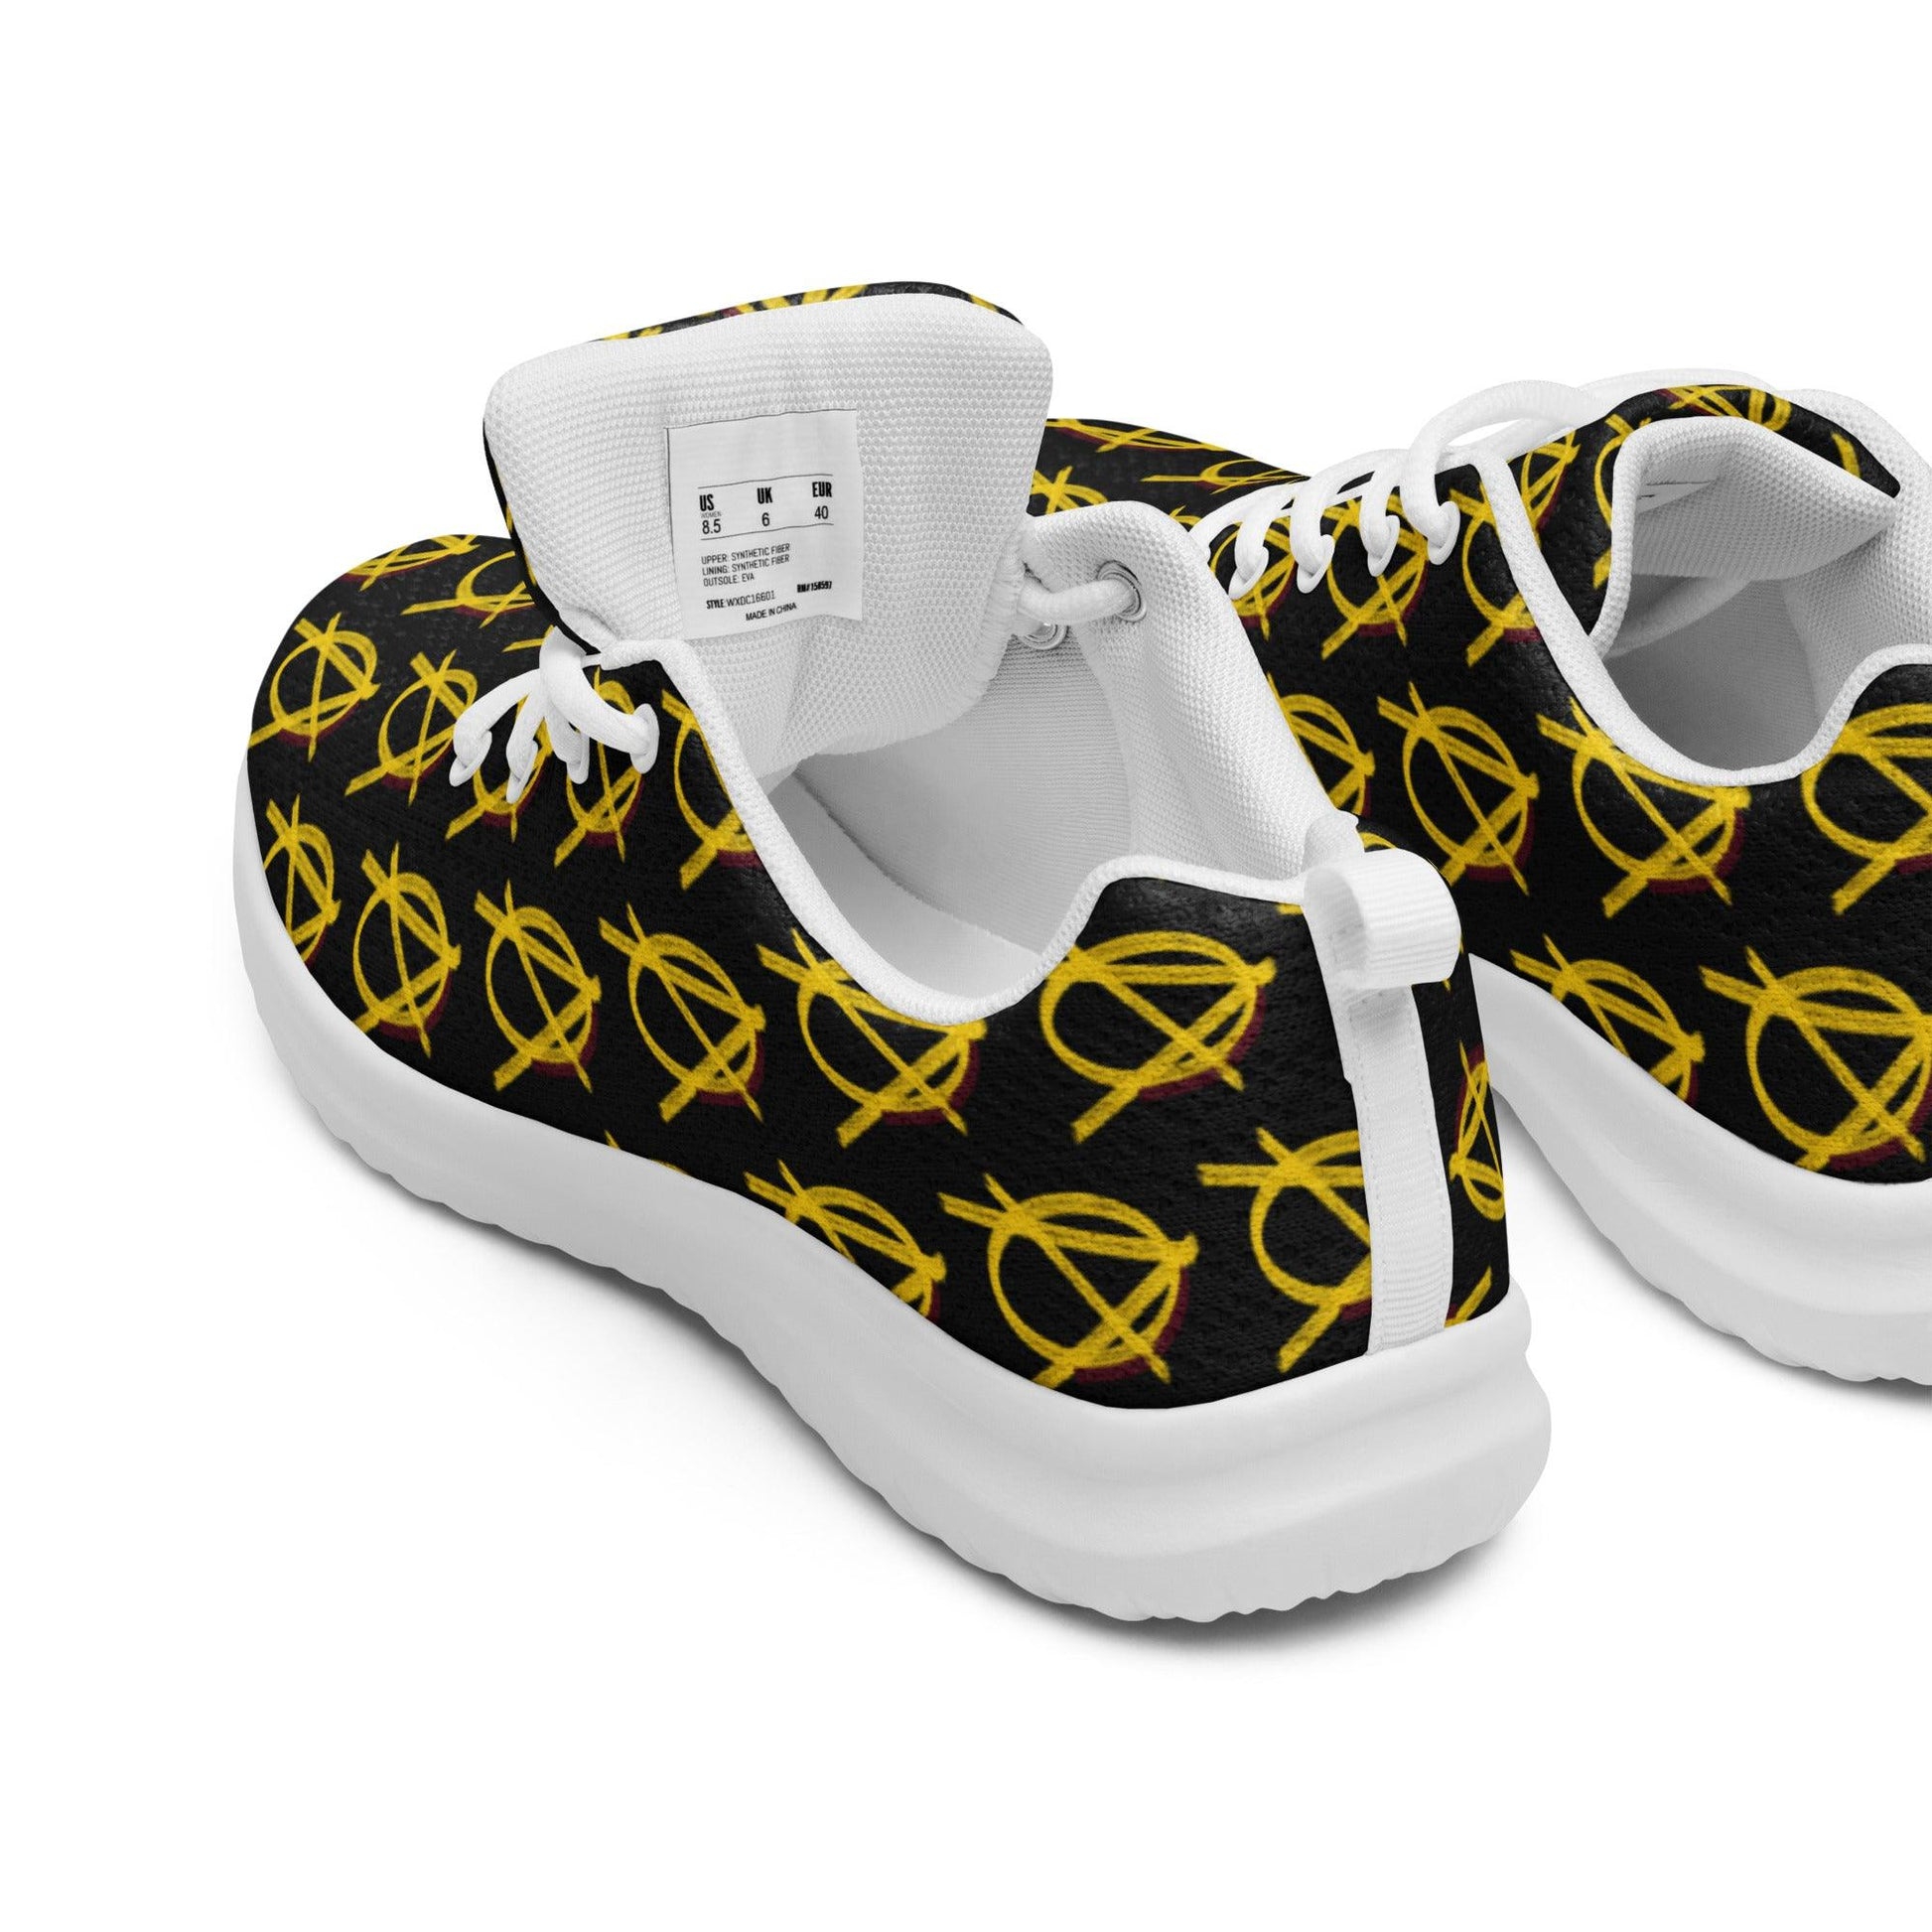 Anarchy Wear Black and Gold Women’s athletic shoes - AnarchyWear